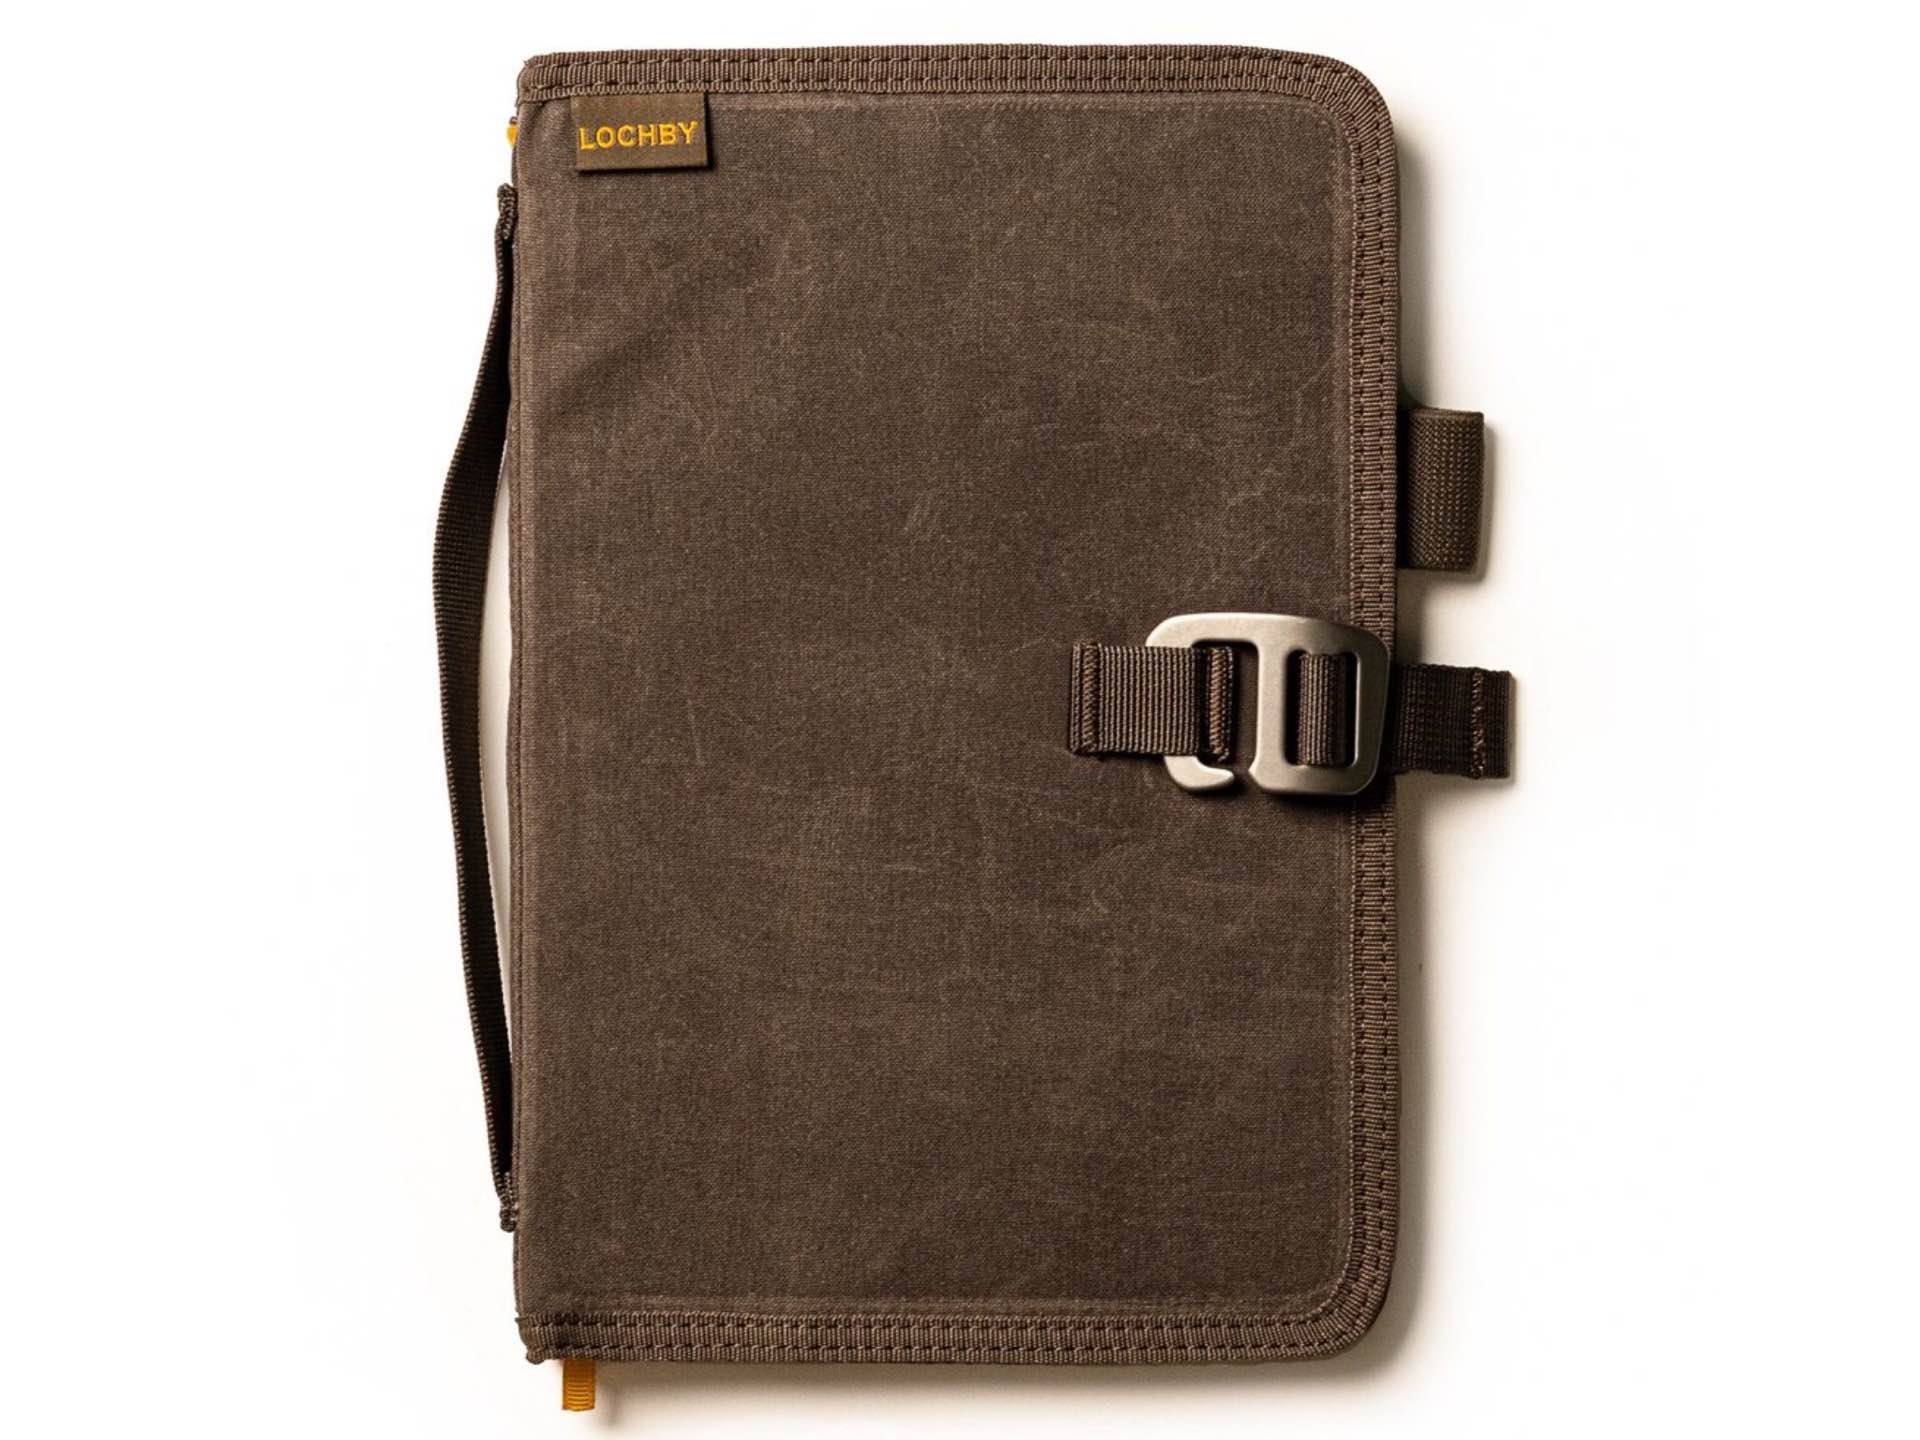 LOCHBY's Field Journal notebook with waxed canvas case. ($49)